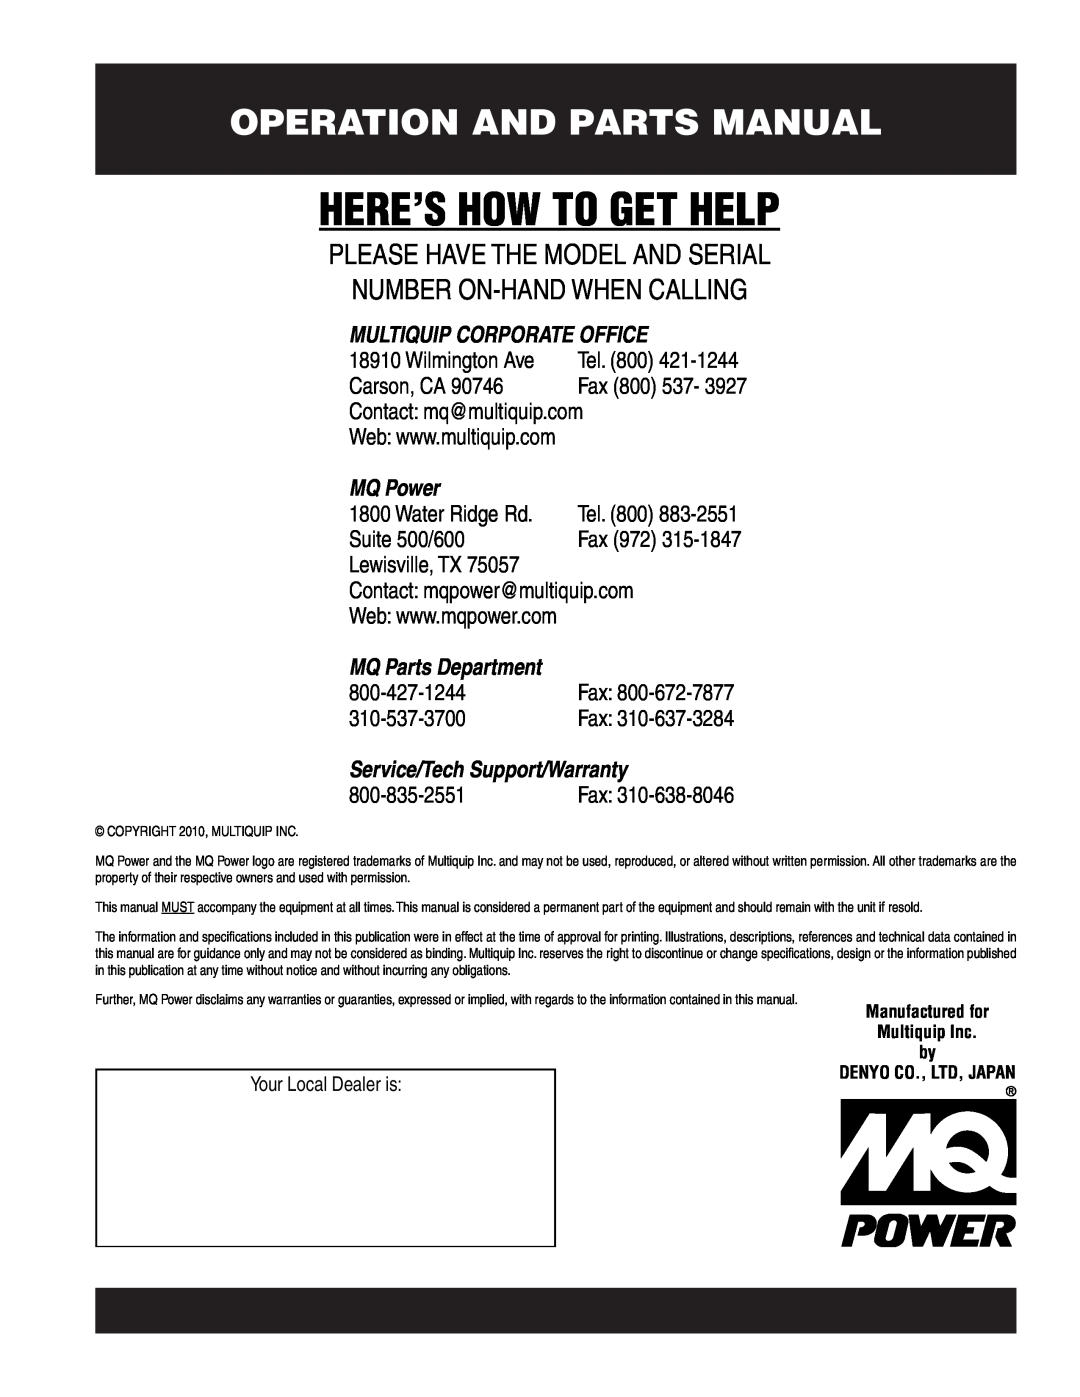 Multiquip DCA-800SSK Here’S How To Get Help, Operation And Parts Manual, Multiquip Corporate Office, Wilmington Ave, Tel 